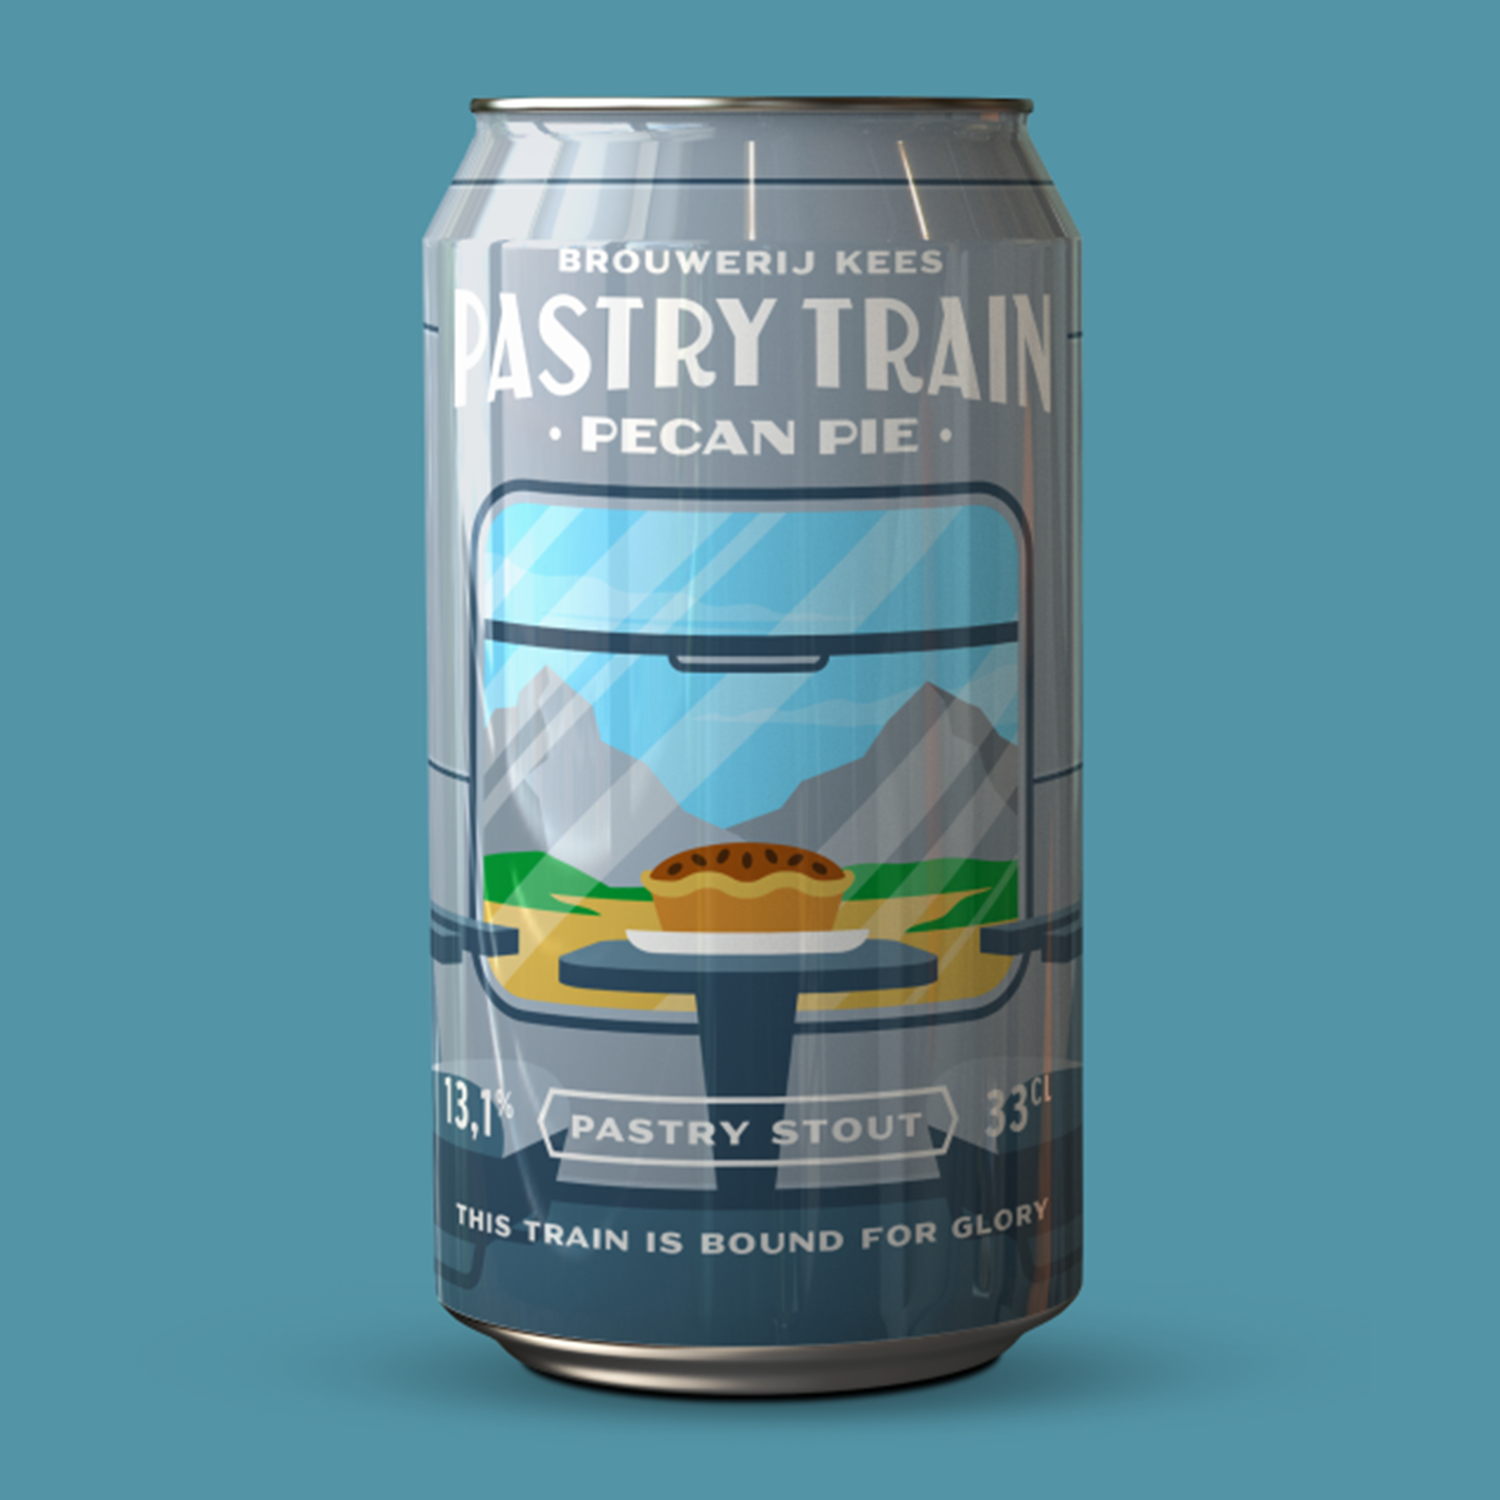 Kees Pastry Train Pecan Pie Imperial Pastry Stout